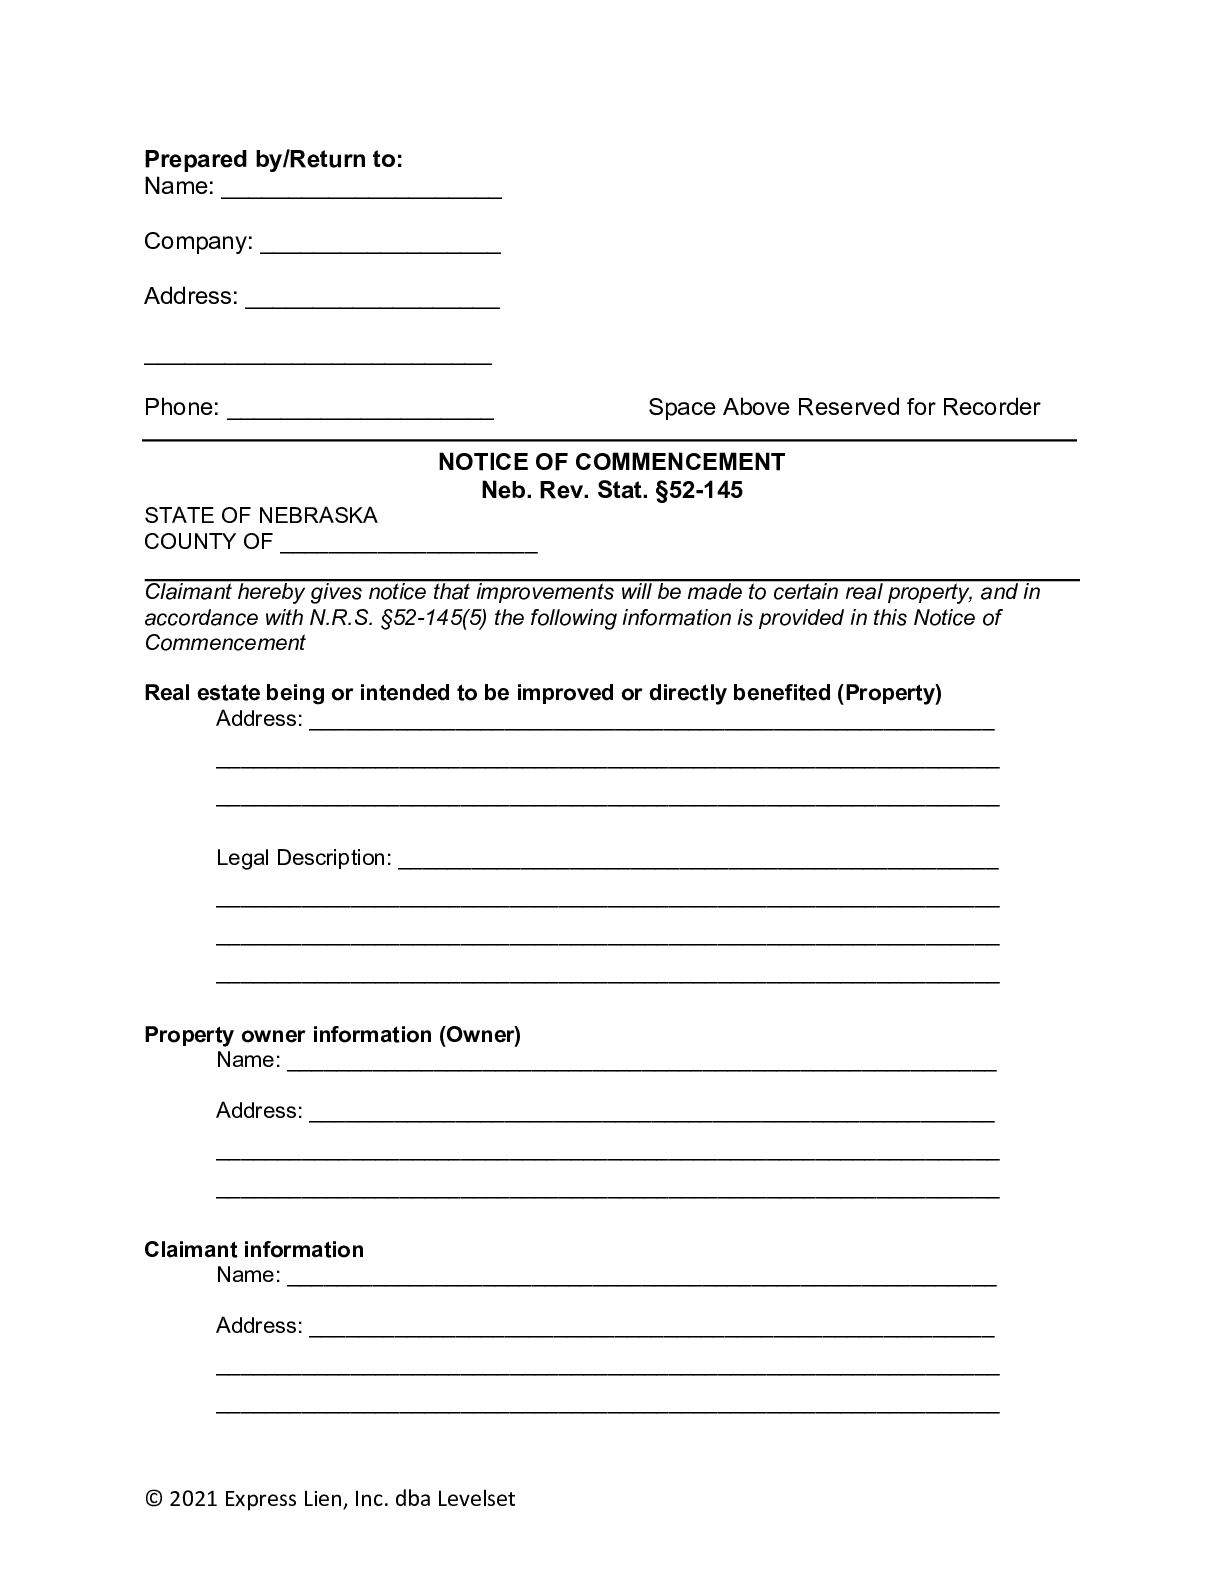 Nebraska Notice of Commencement Form - free from